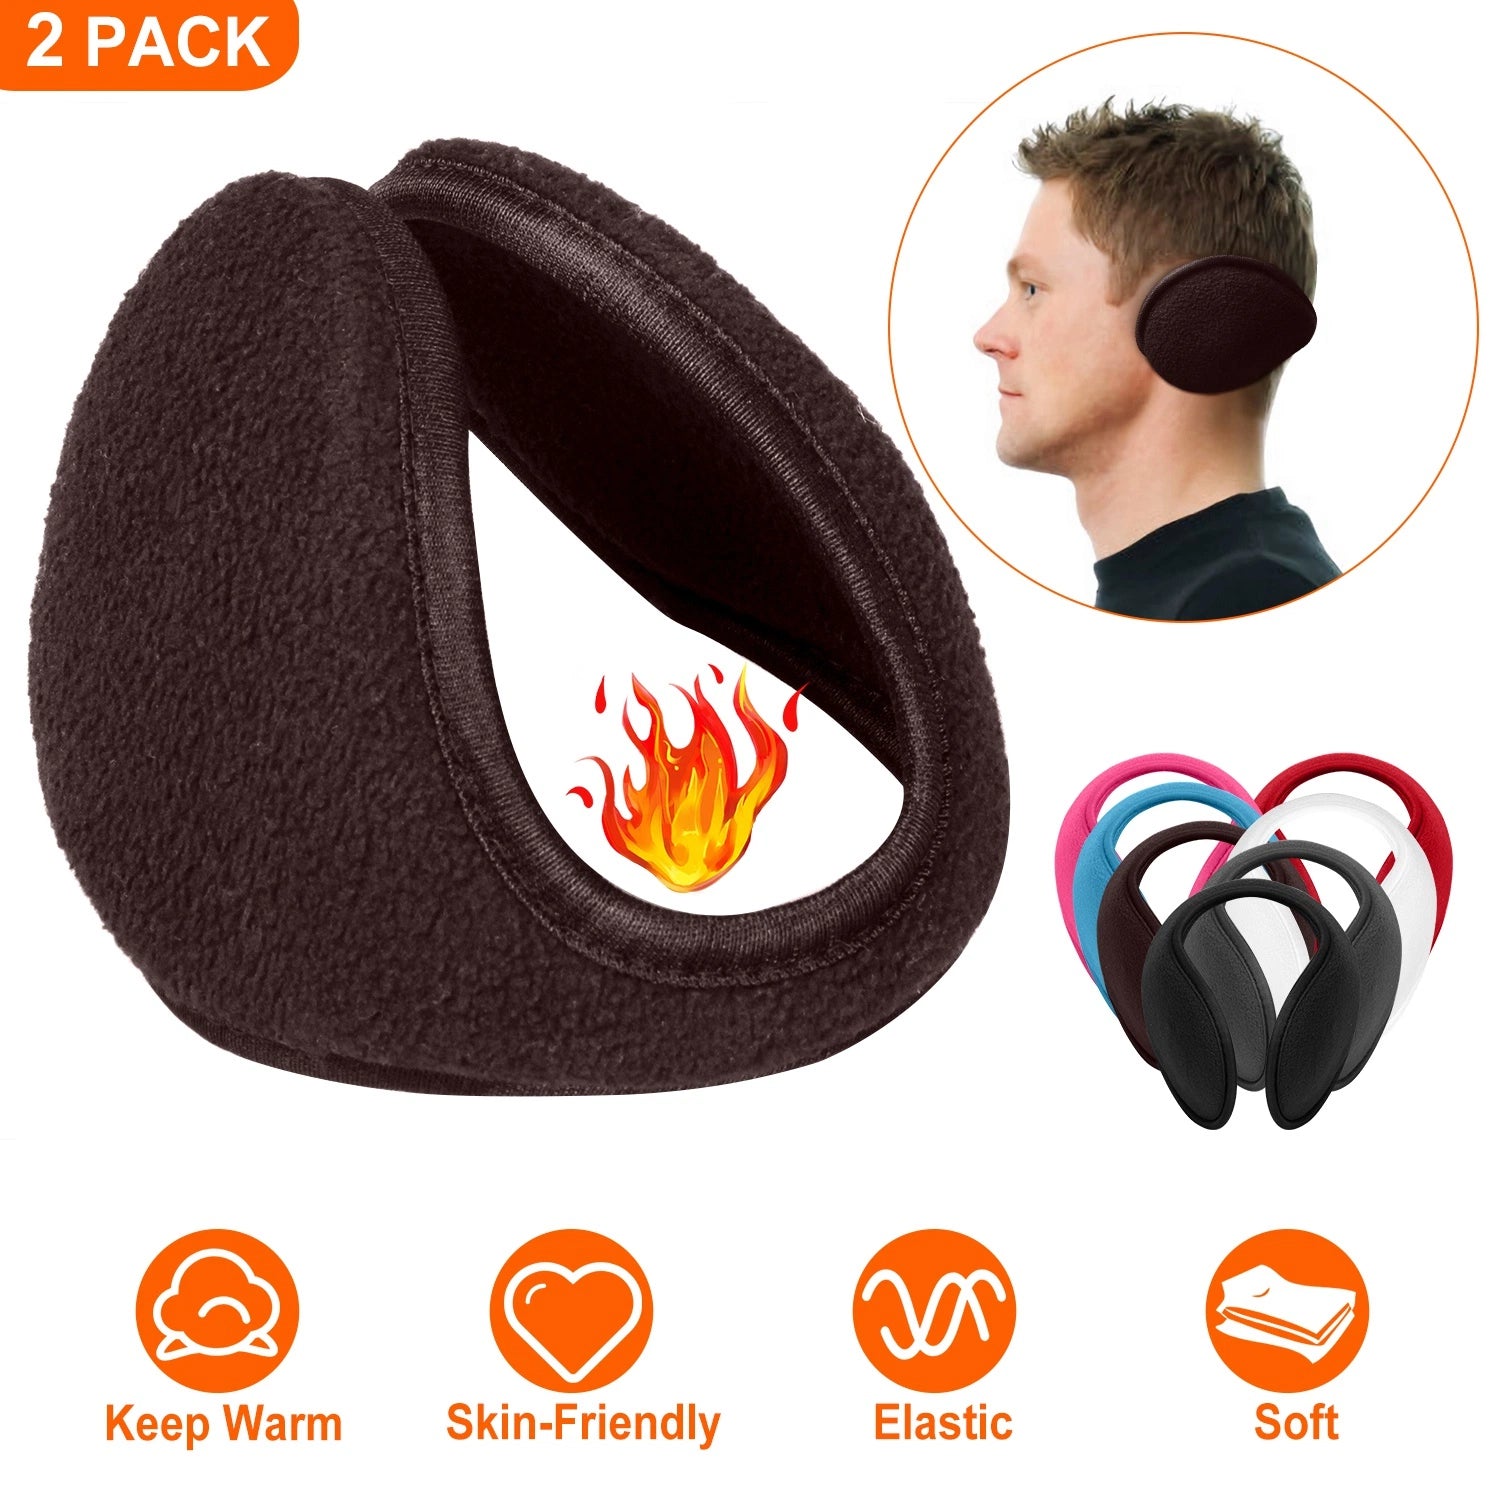 Unisex Winter Ear Warmers: Your Ideal Companion for Cold Weather Adventures